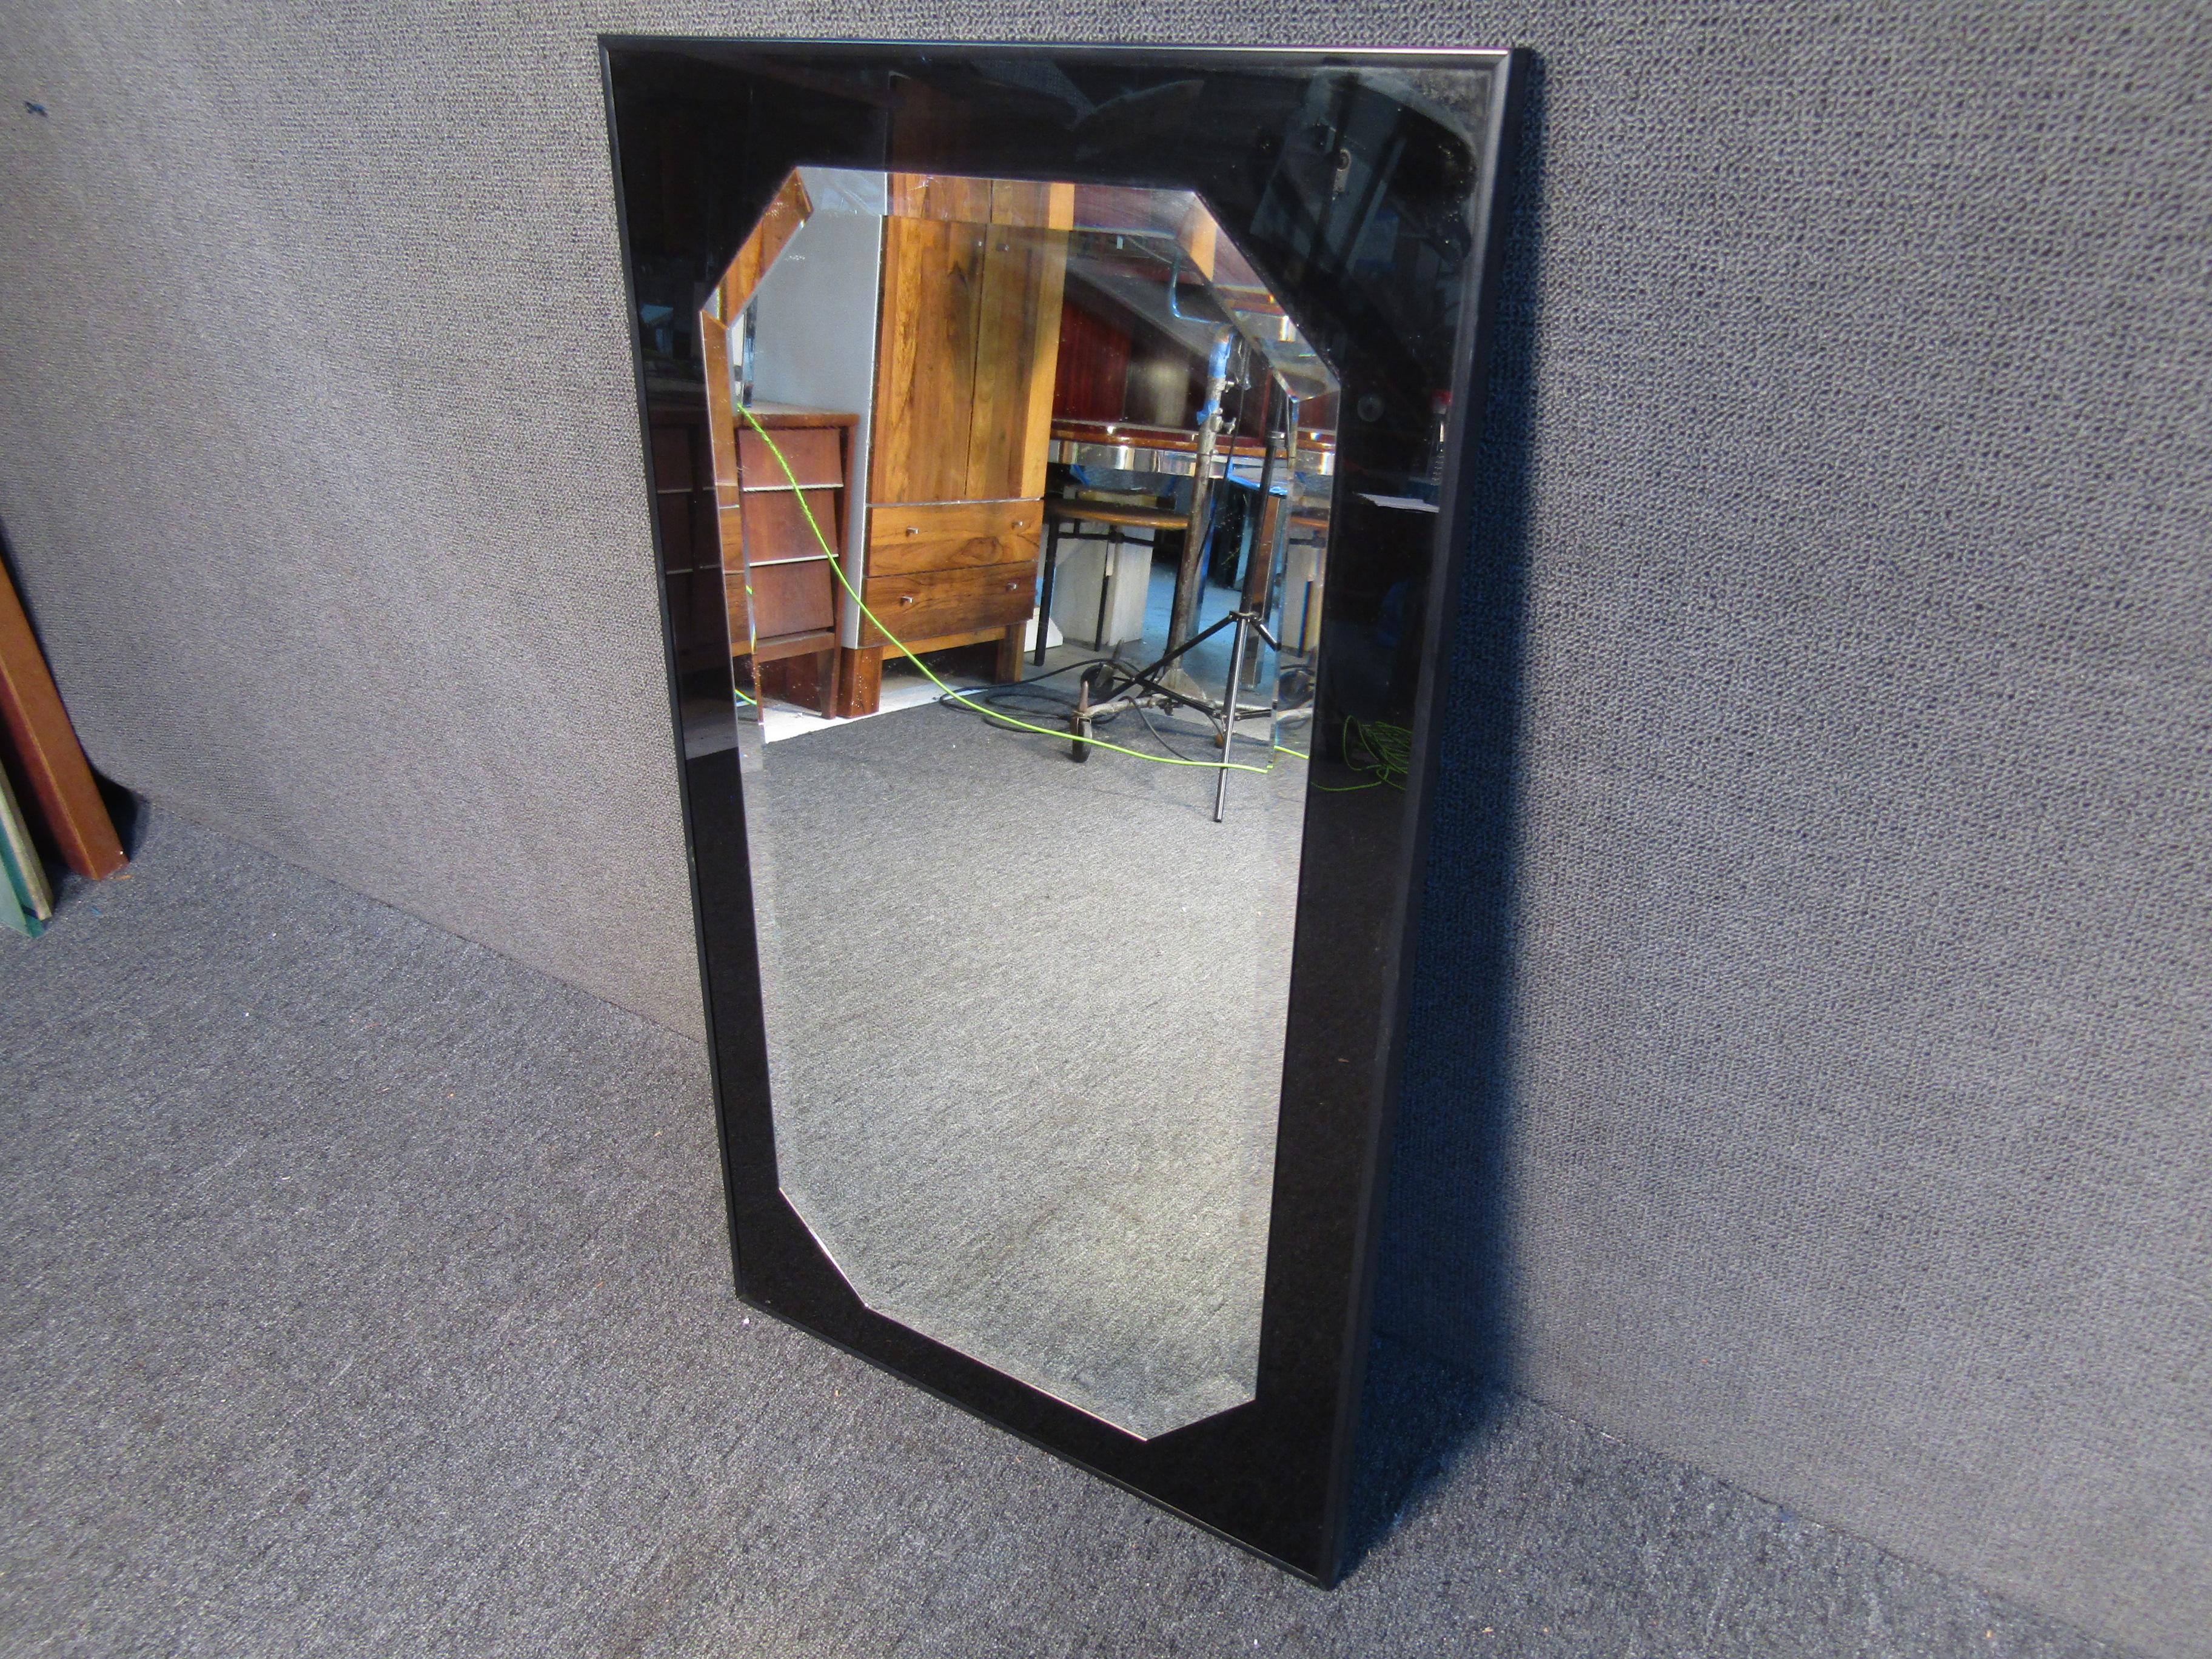 Stylish mirror in the style of Milo Baughman for Thayer Coggin. This mirror features a raised beveled octagonal mirror on a sleek black mirrored back, and is surrounded by a black aluminum framing. A excellent addition to any living or office